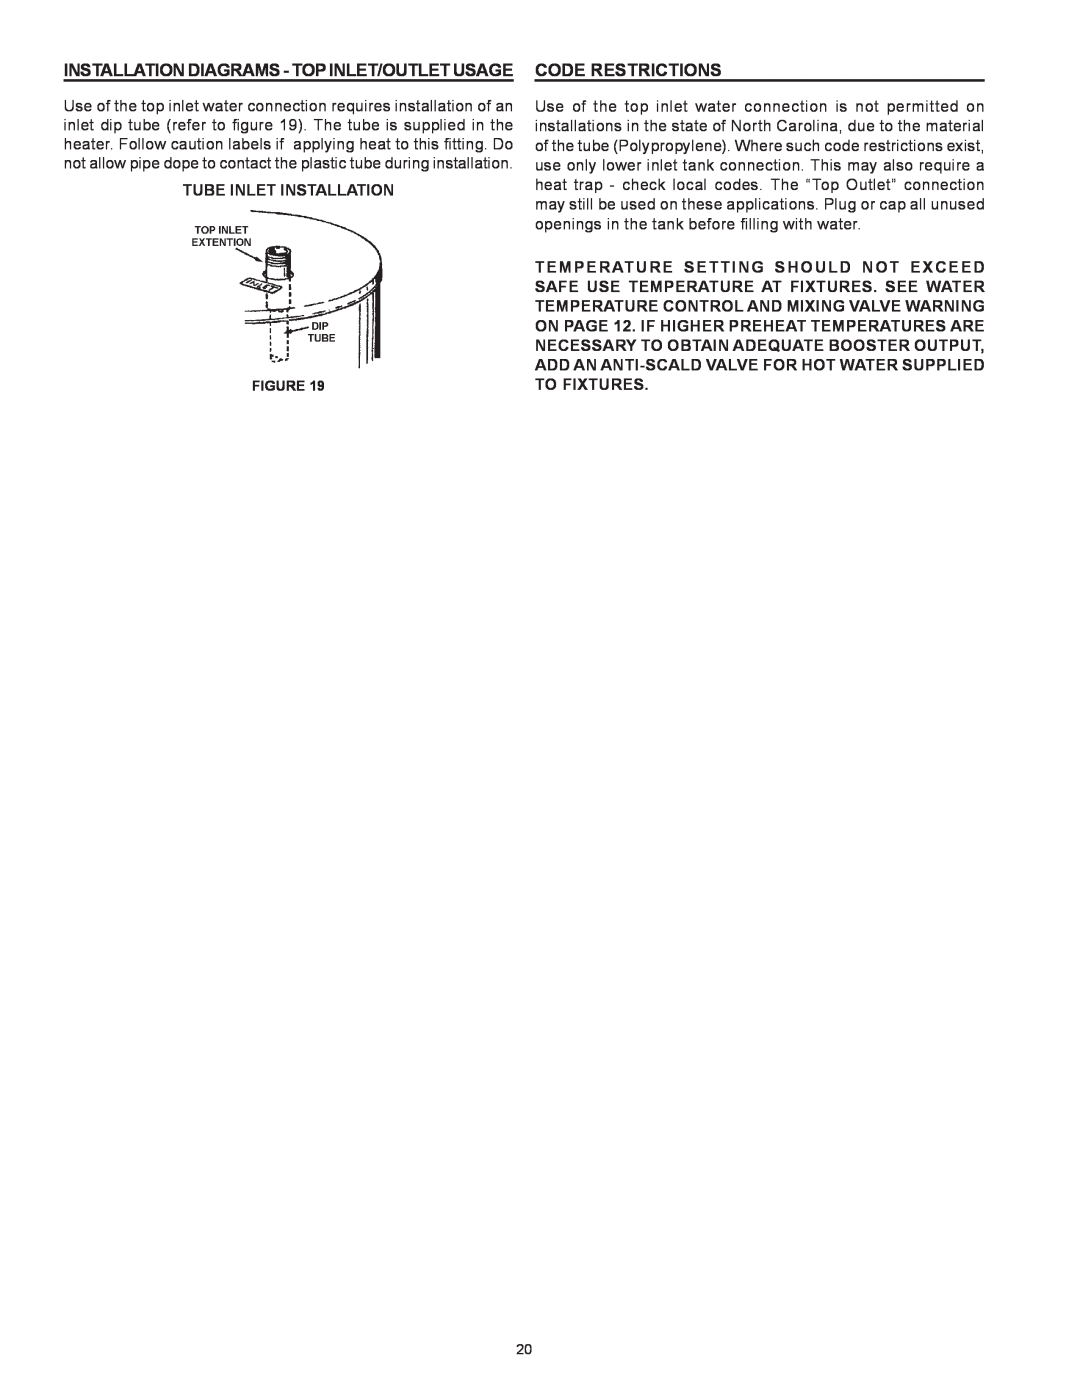 State Industries SBD85500NE Installation Diagrams - Top Inlet/Outlet Usage, Code Restrictions, Tube Inlet Installation 